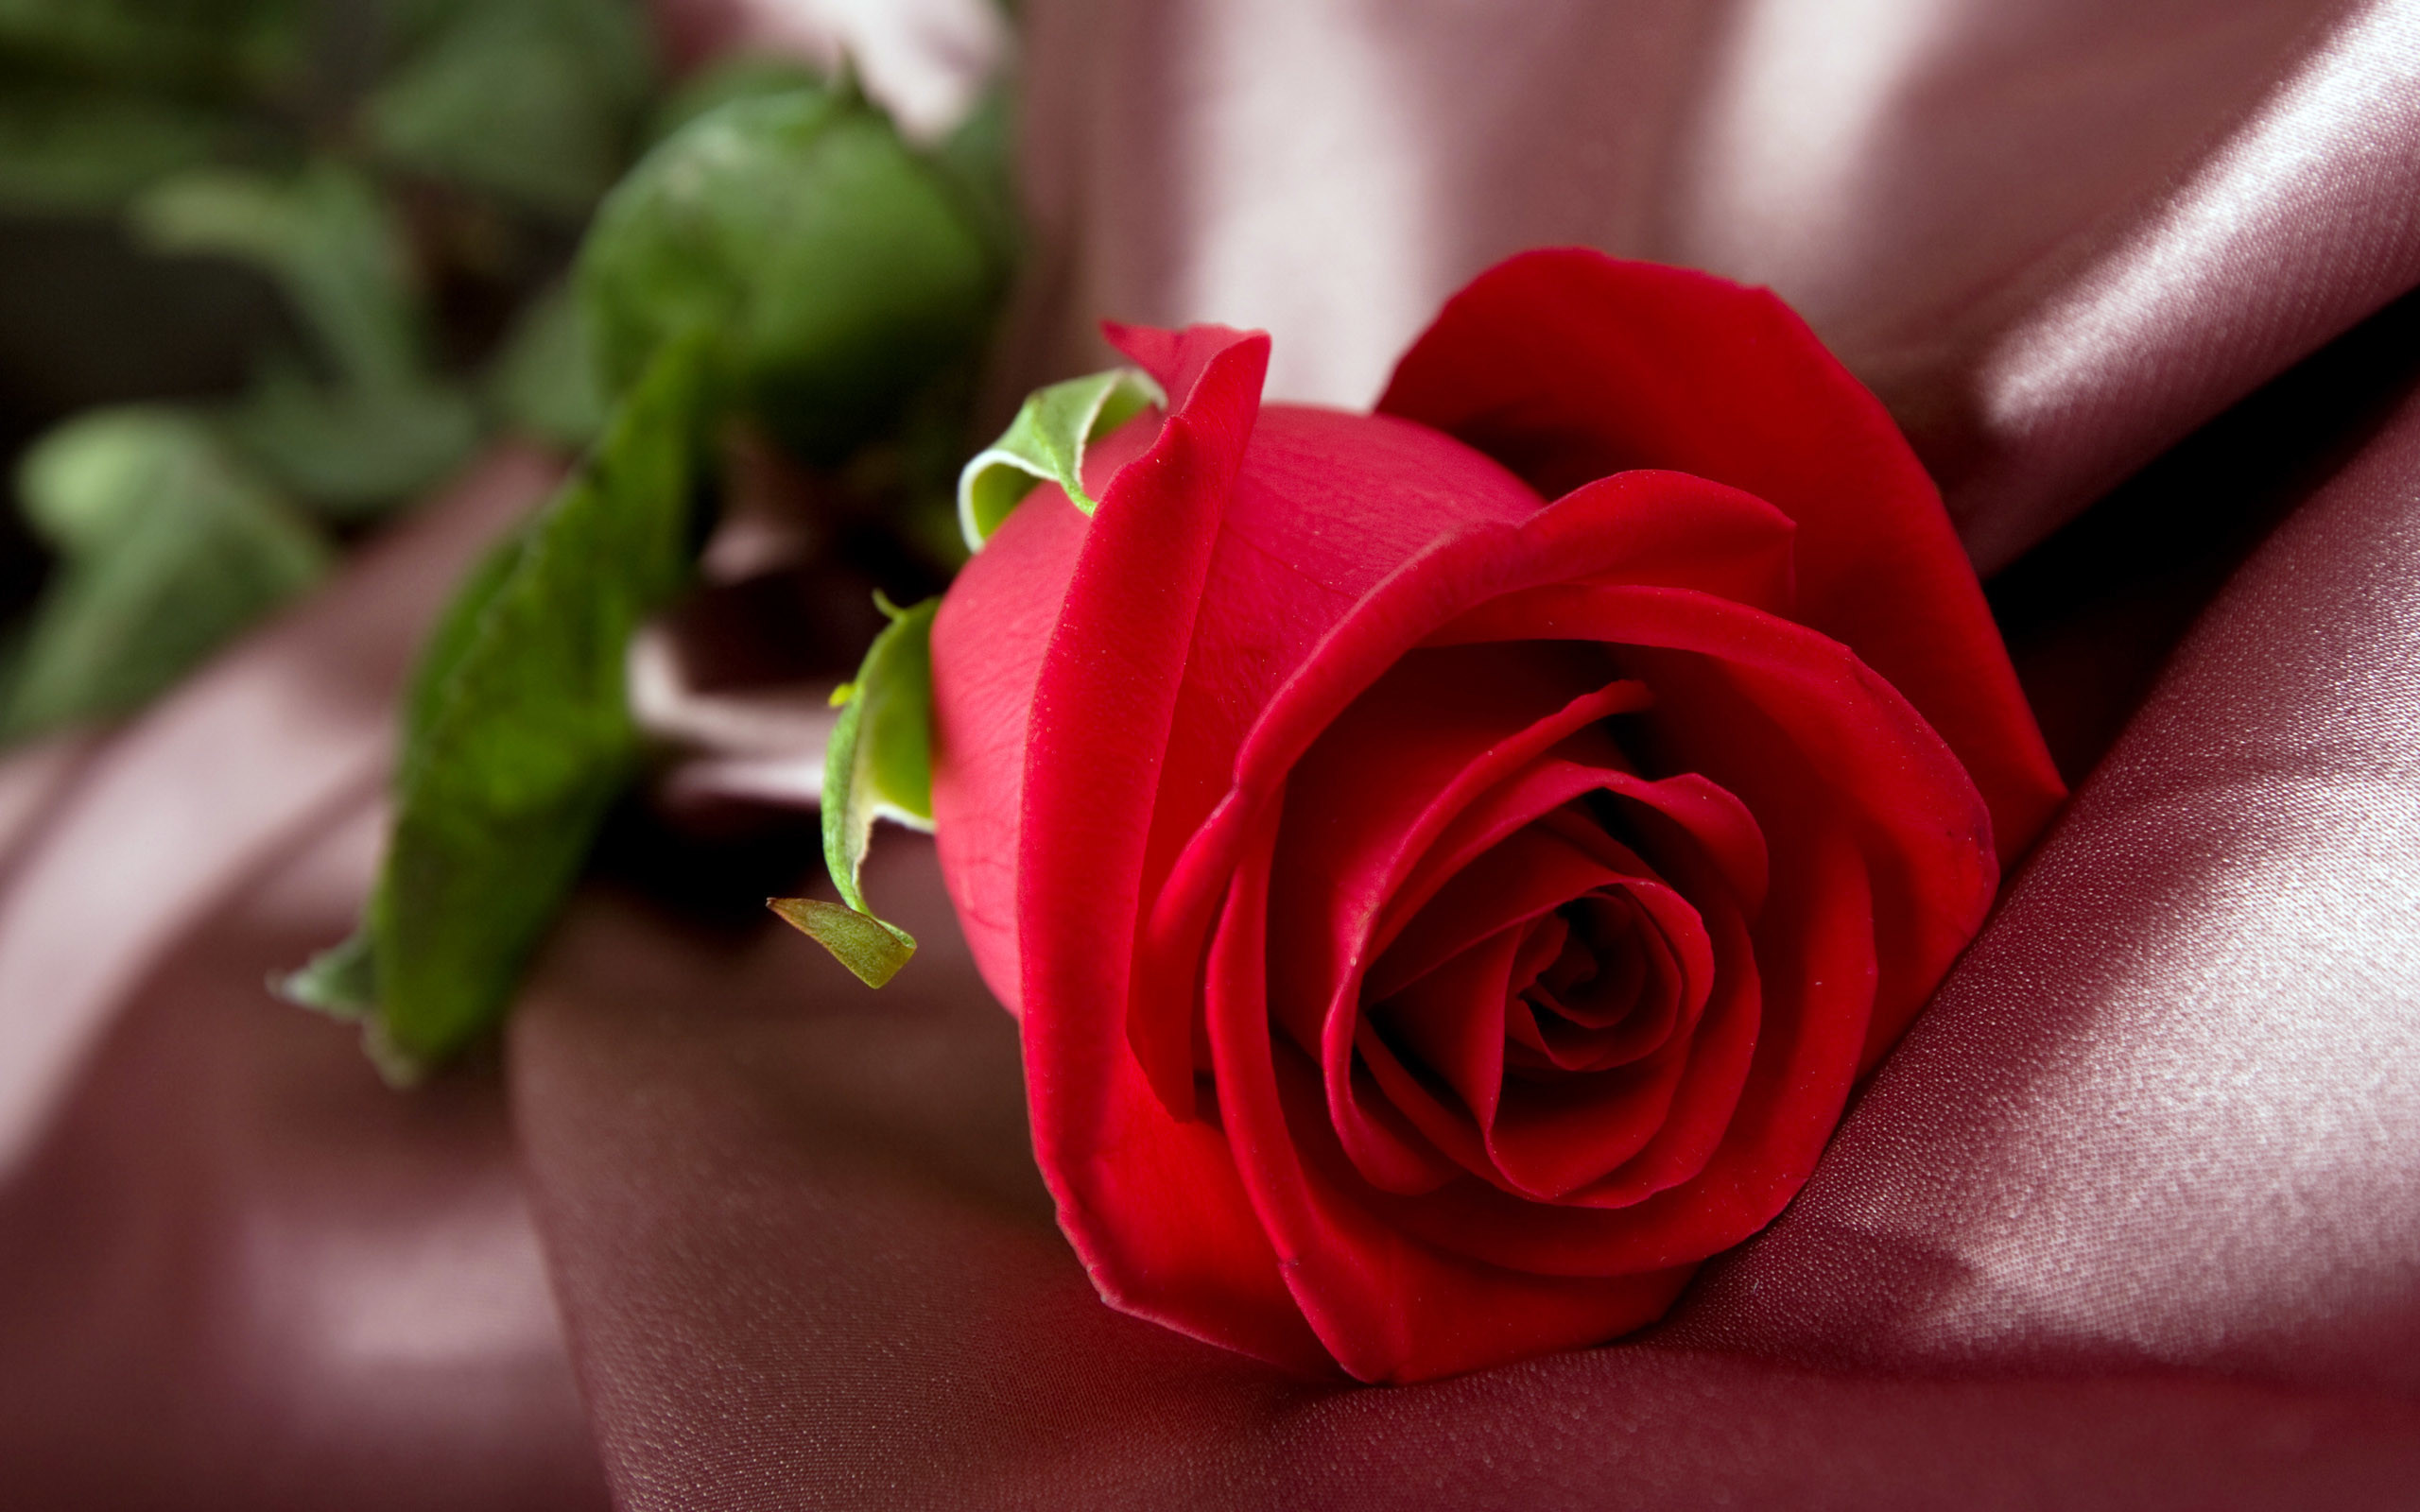 2560x1600 1920x1080 Water red rose Wallpapers, Rose Flower images, Rose Pictures and